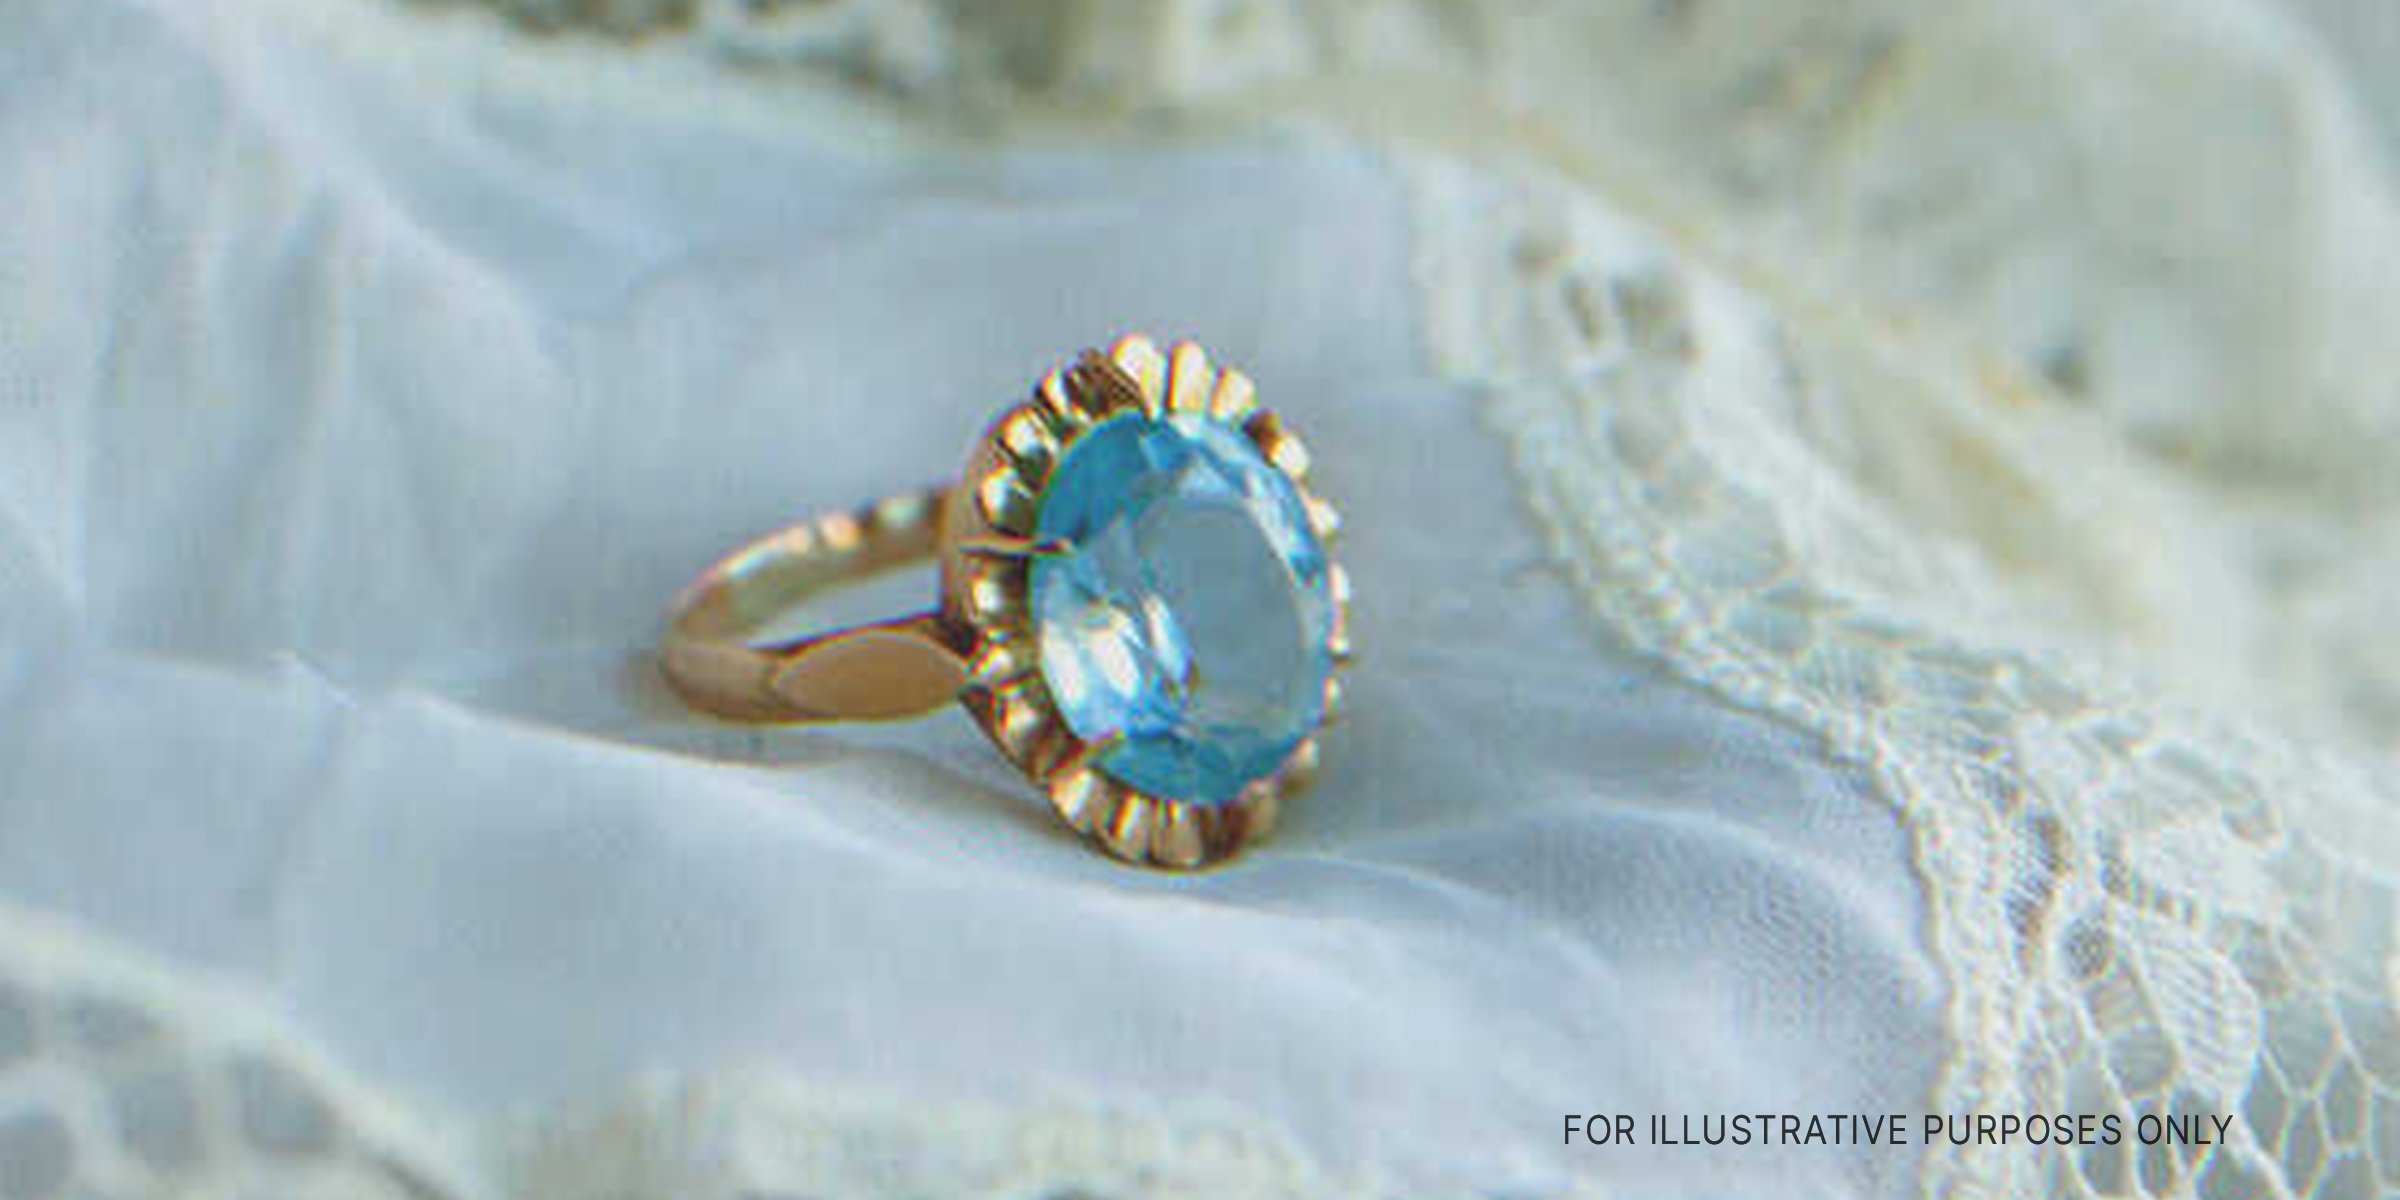 A Ring | Source: Shutterstock